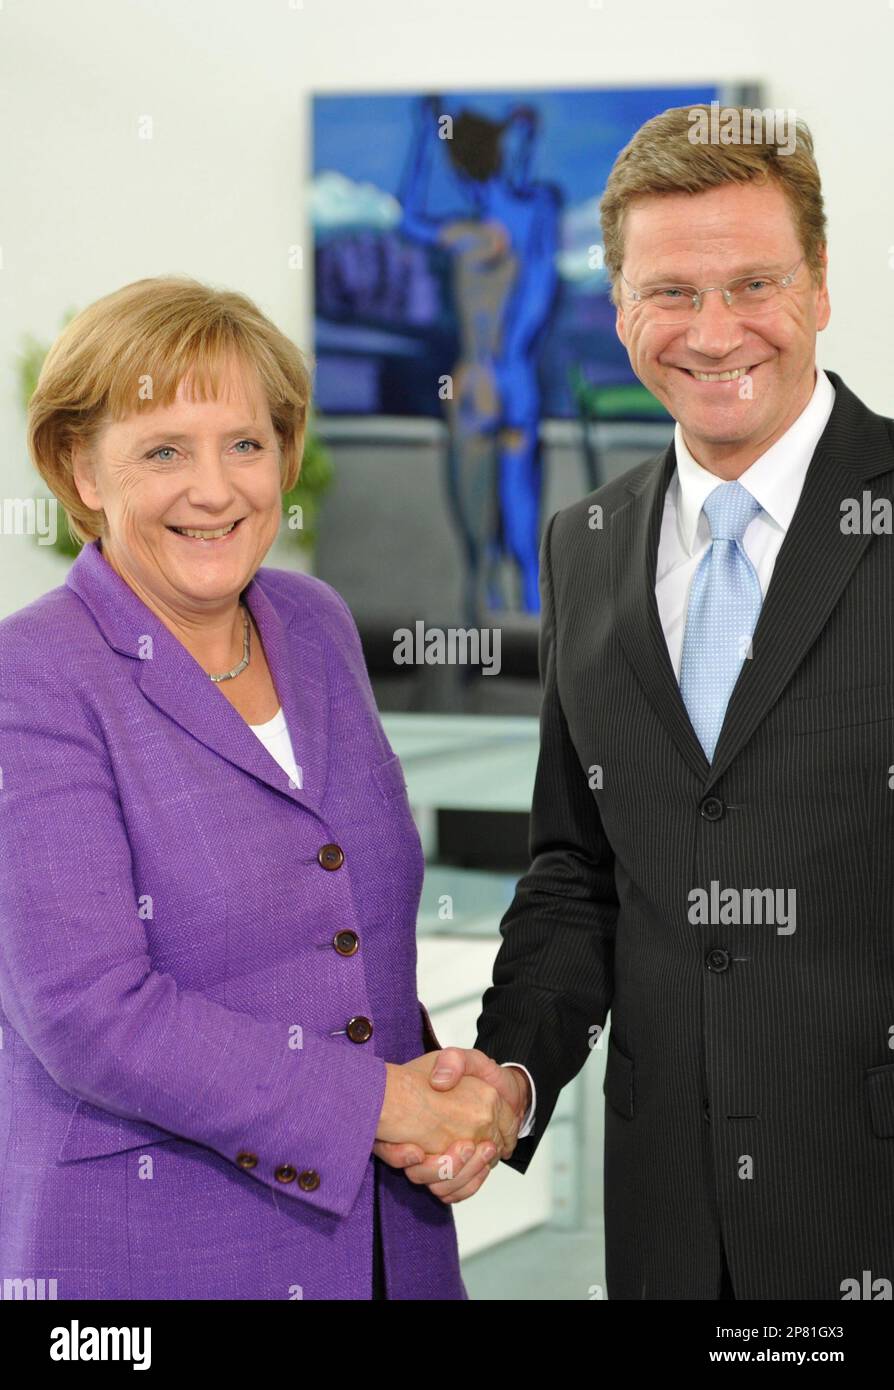 Angela Merkel, German Chancellor and leader of the conservative Christian Democratic Union party (CDU), left, and Guido Westerwelle, leader of the pro-business Free Democrats (FDP) meet at the Chancellery in Berlin, Monday, Sept. 28, 2009. Merkel's conservatives vowed on Monday to seal a coalition deal with the Free Democrats (FDP) within a month after winning Germany's election. (AP Photo/Wolfgang Rattay,Pool) Foto Stock